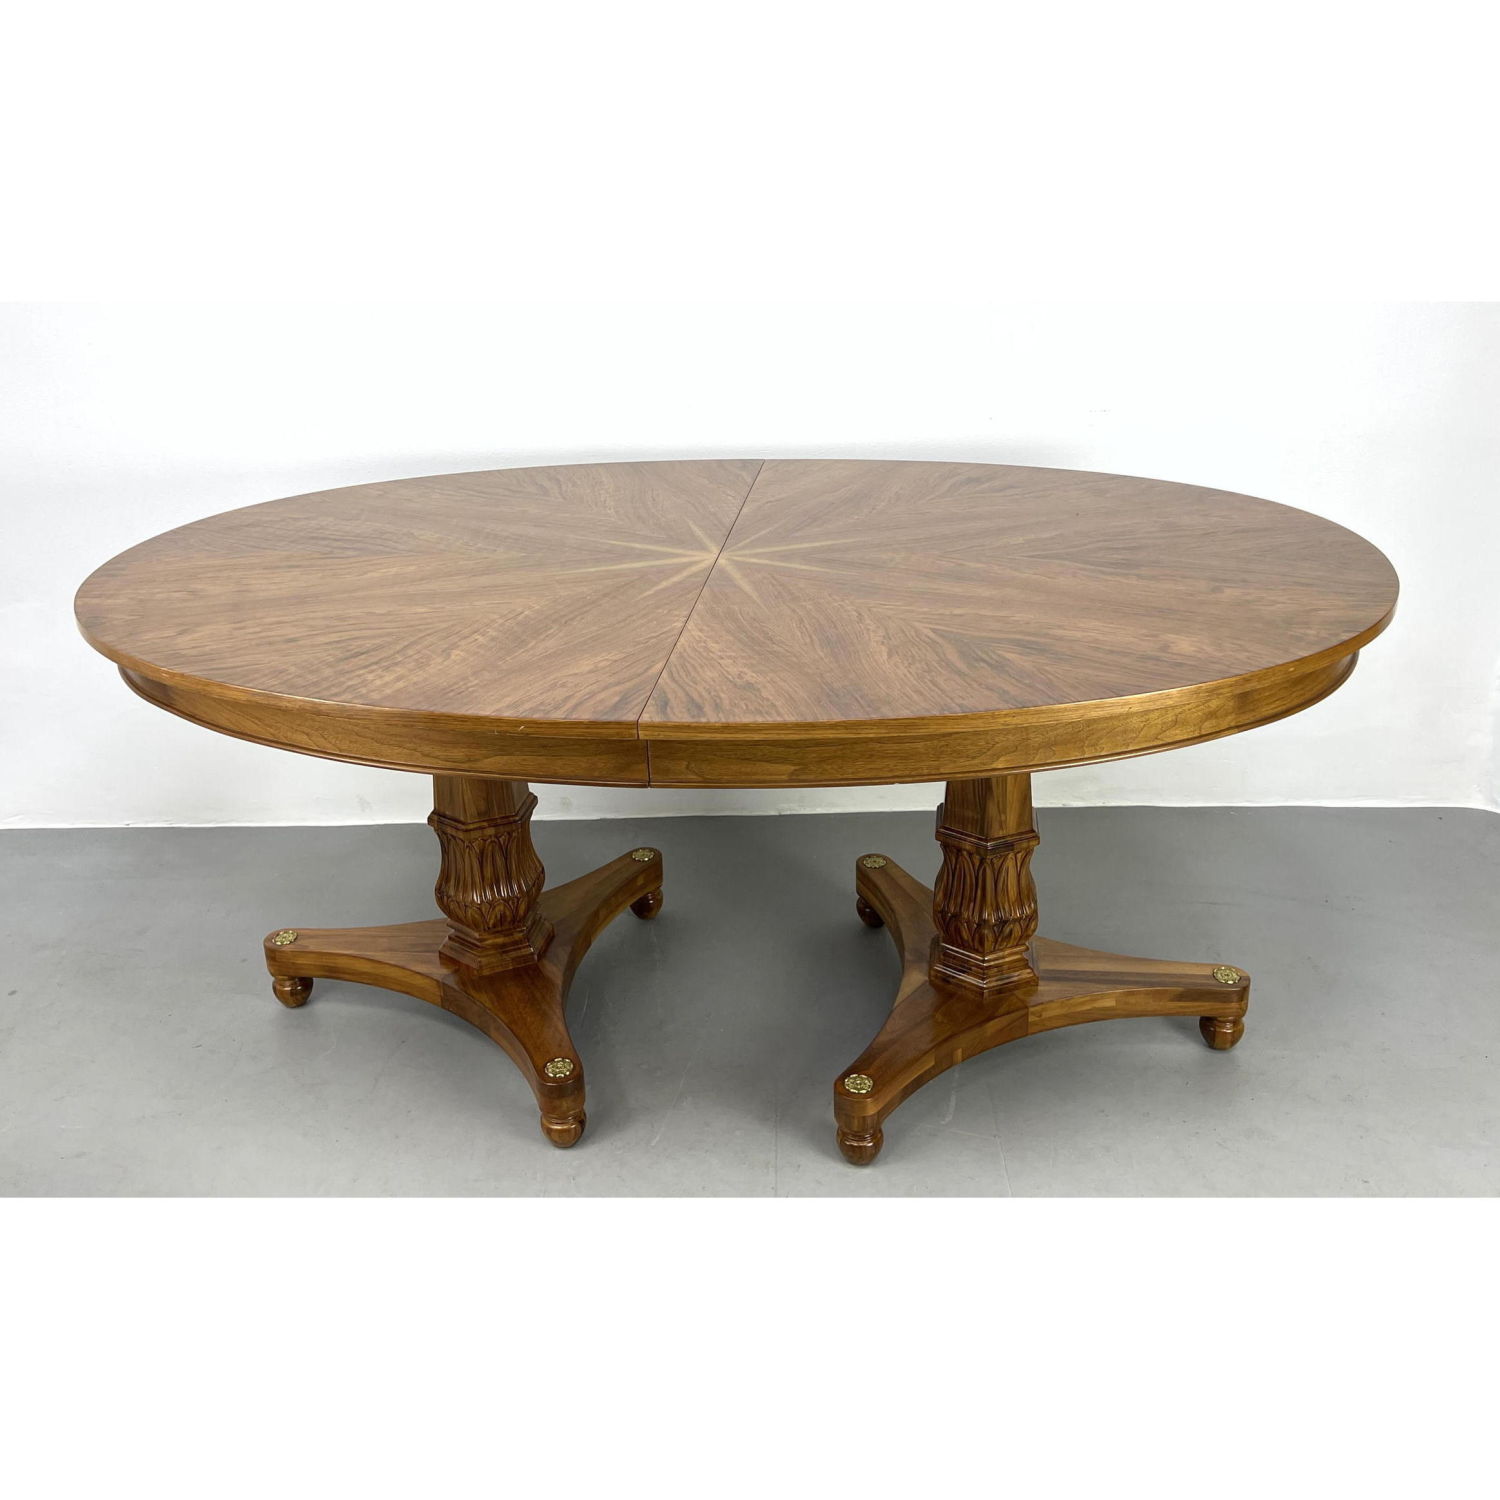 Double Pedestal Dining Table. Star